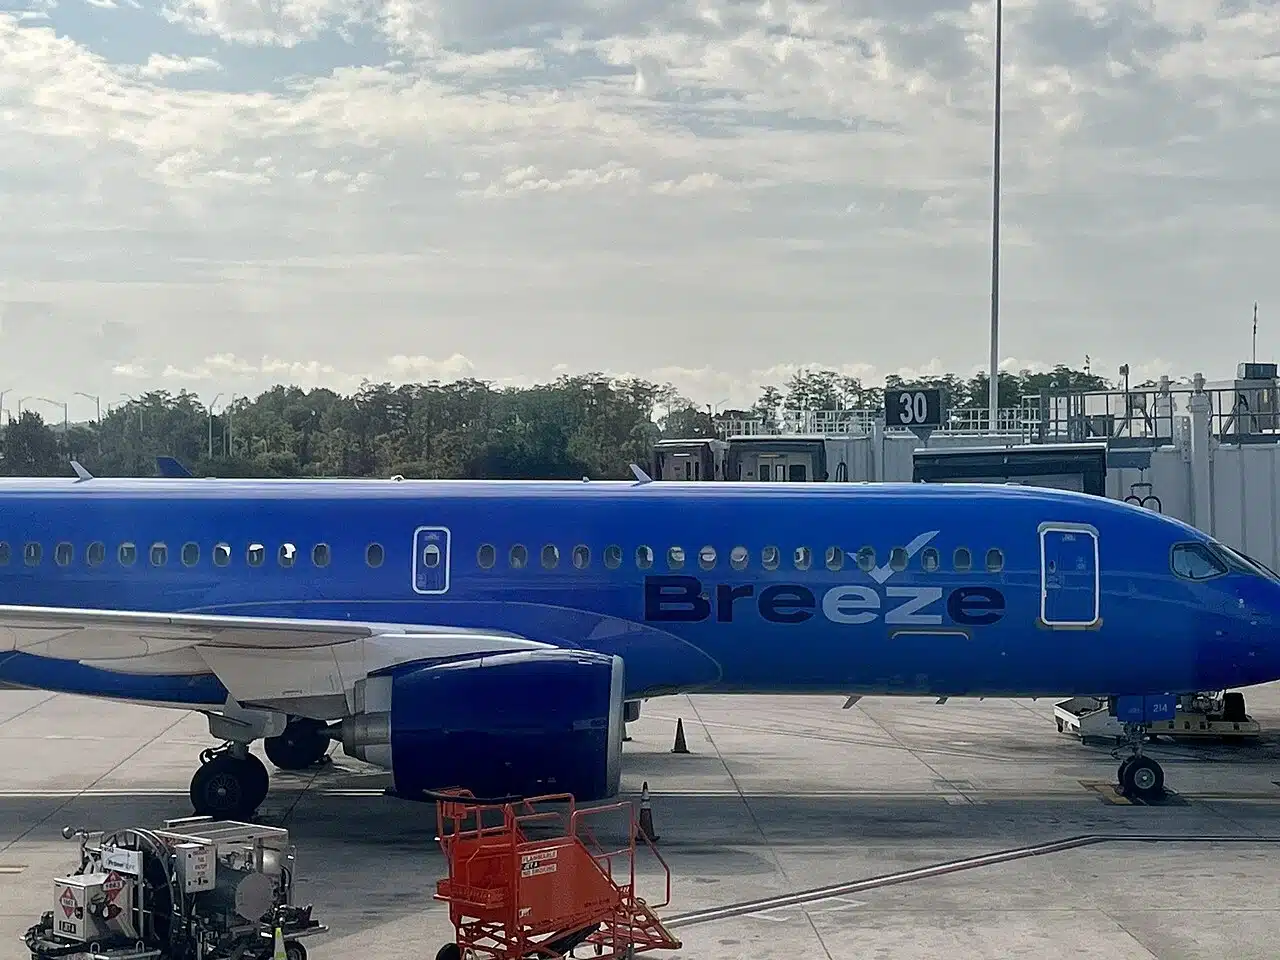 Breeze Airways aircraft at the gate.